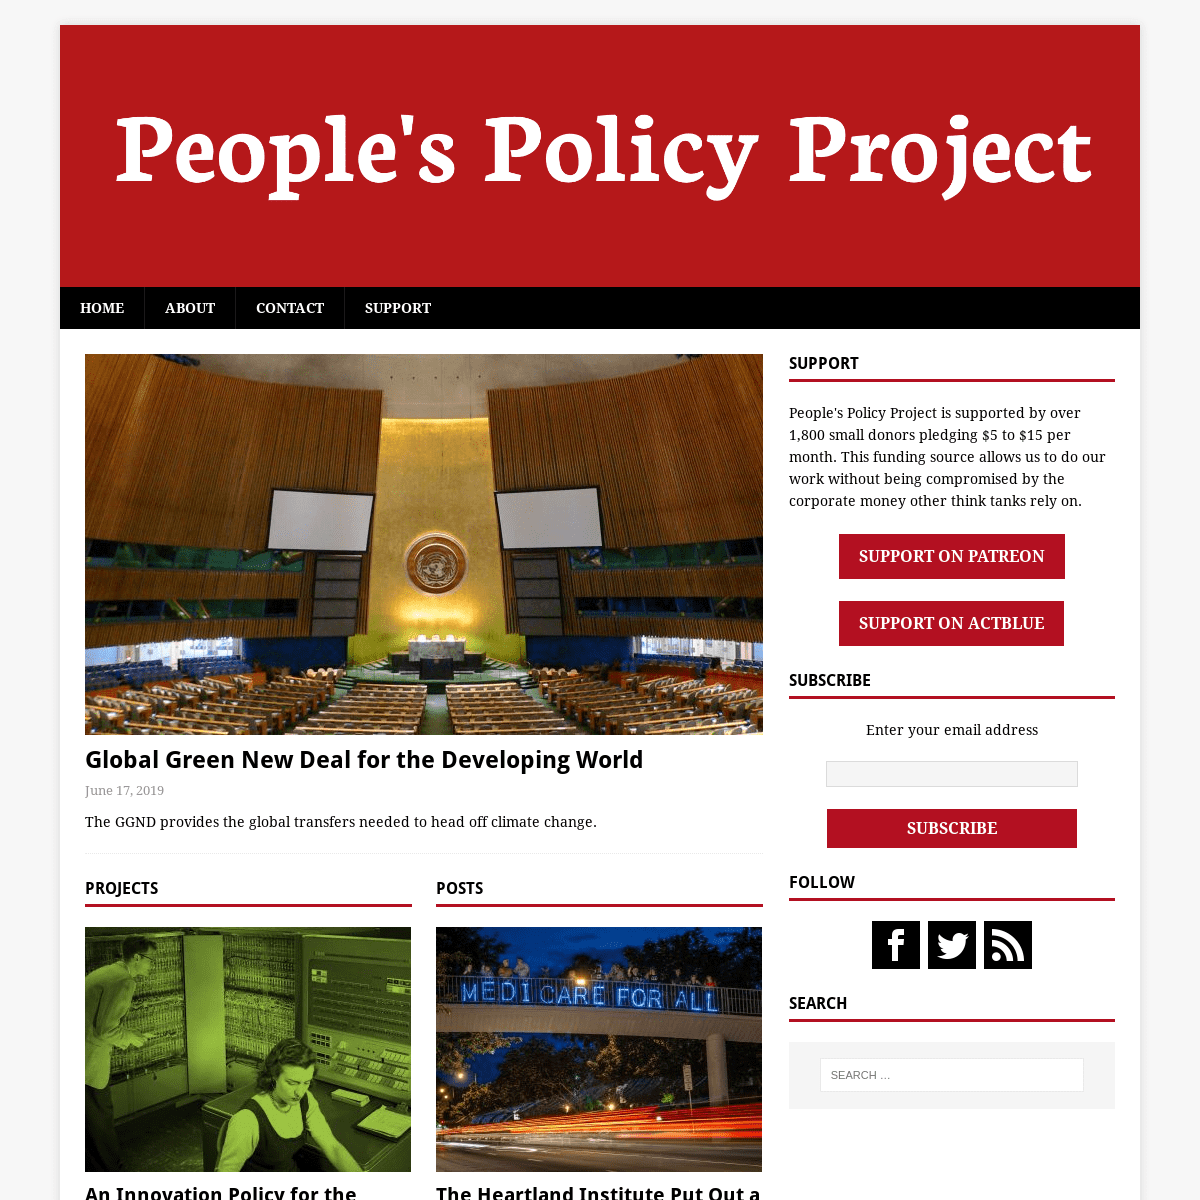 People's Policy Project